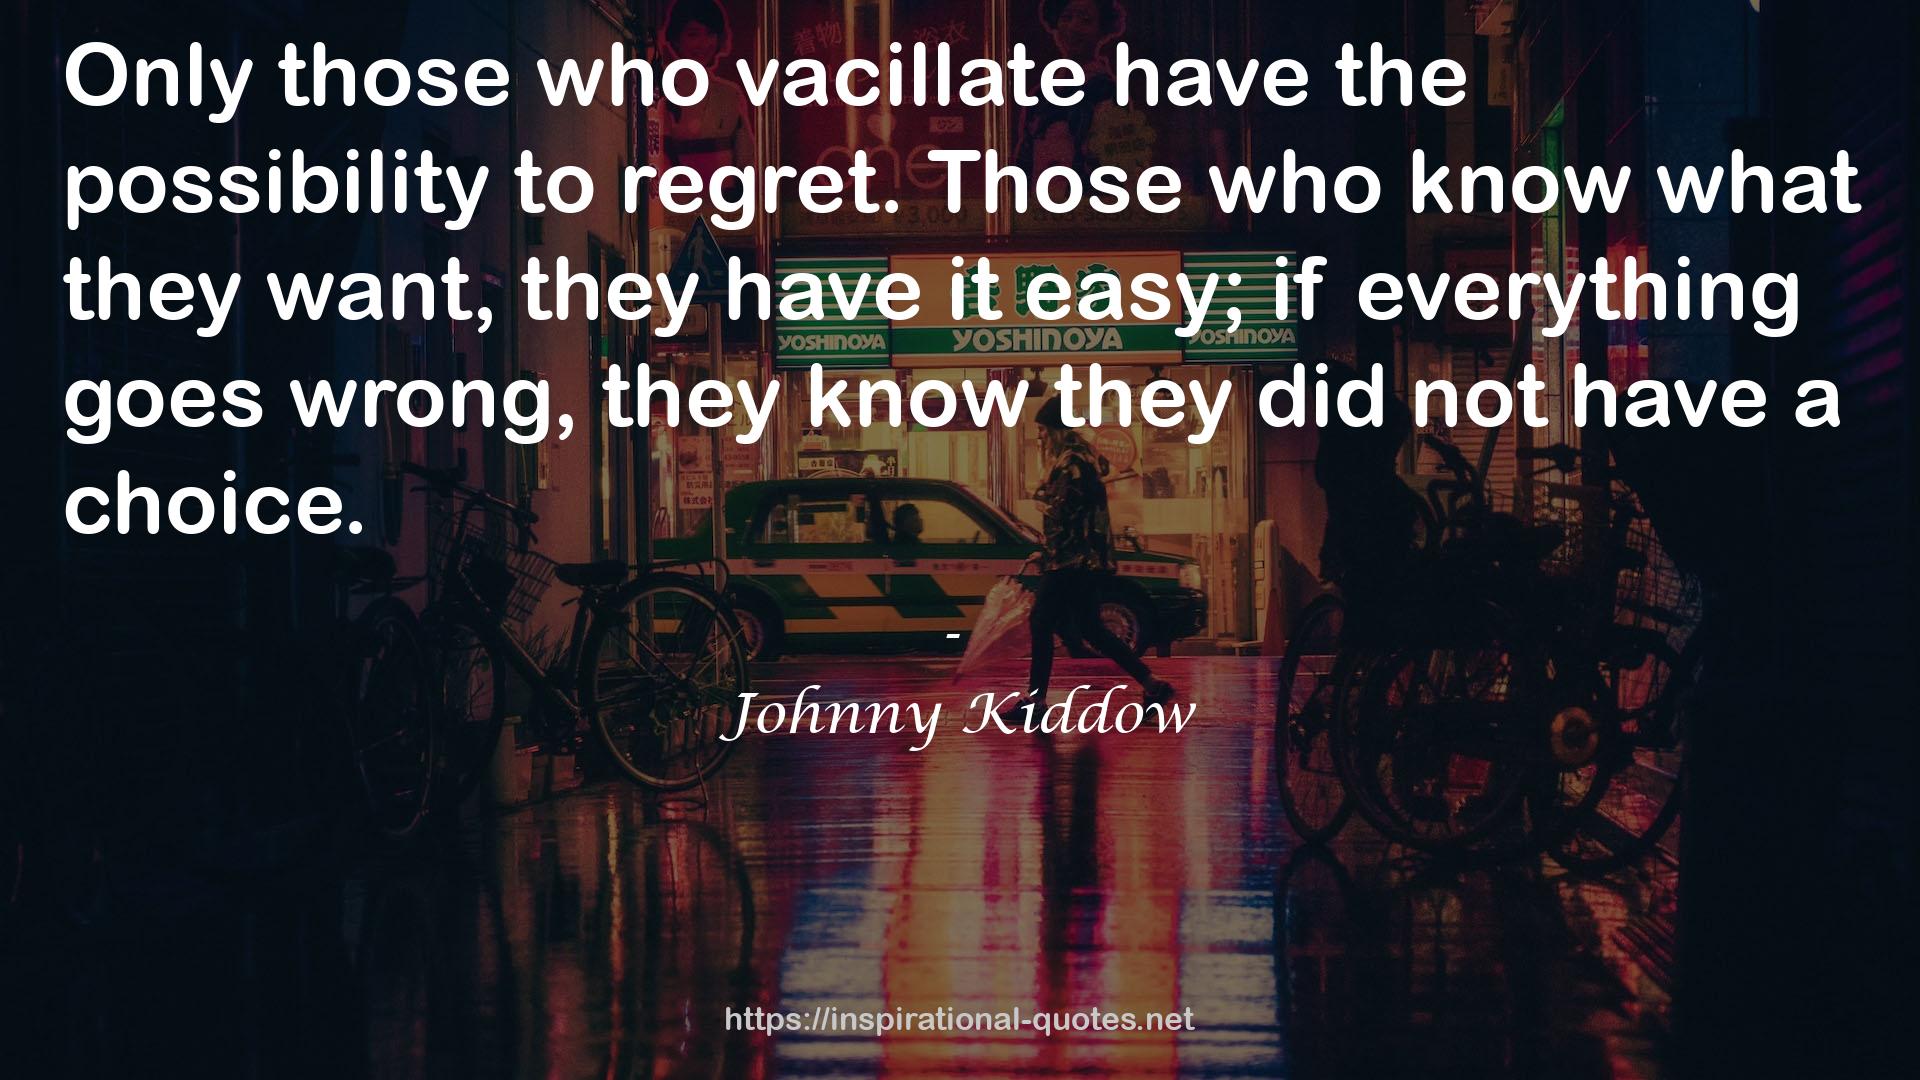 Johnny Kiddow QUOTES